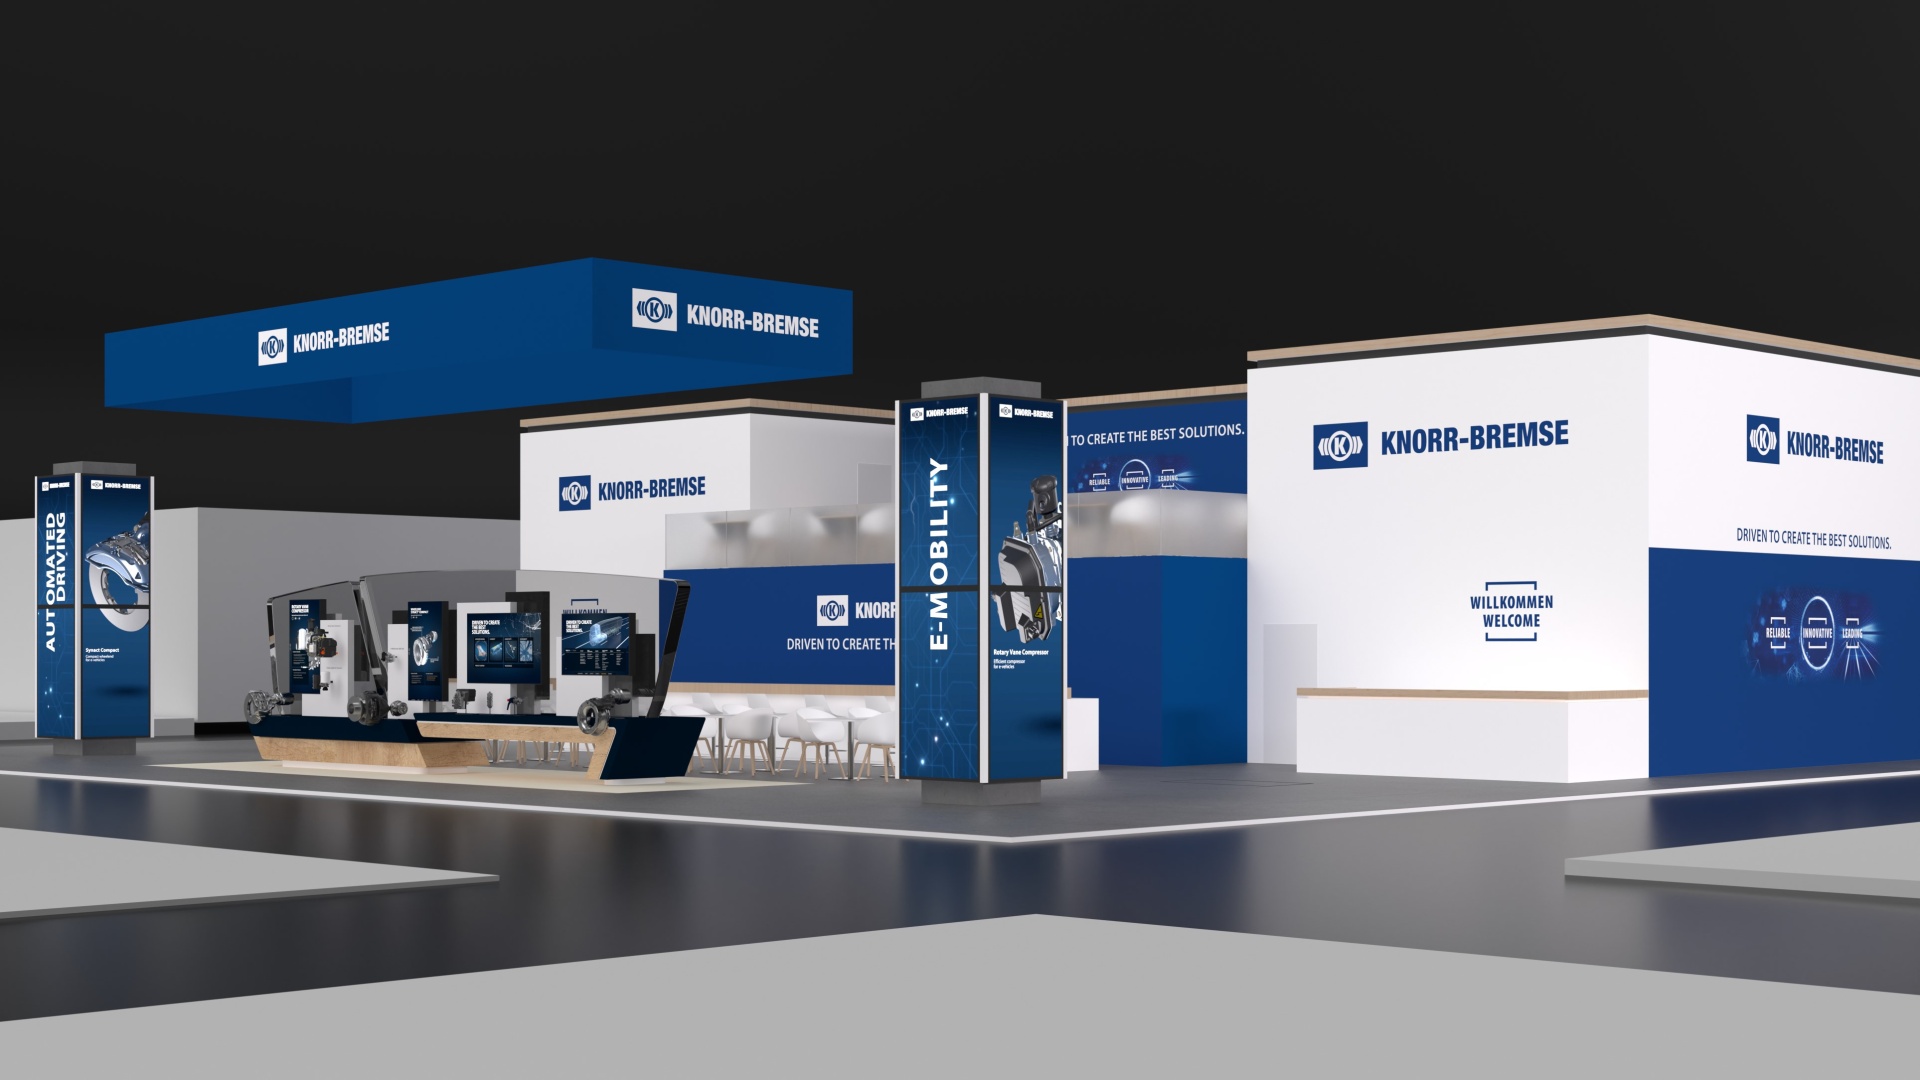 Rendering of the Knorr-Bremse stand at IAA Transportation 2022